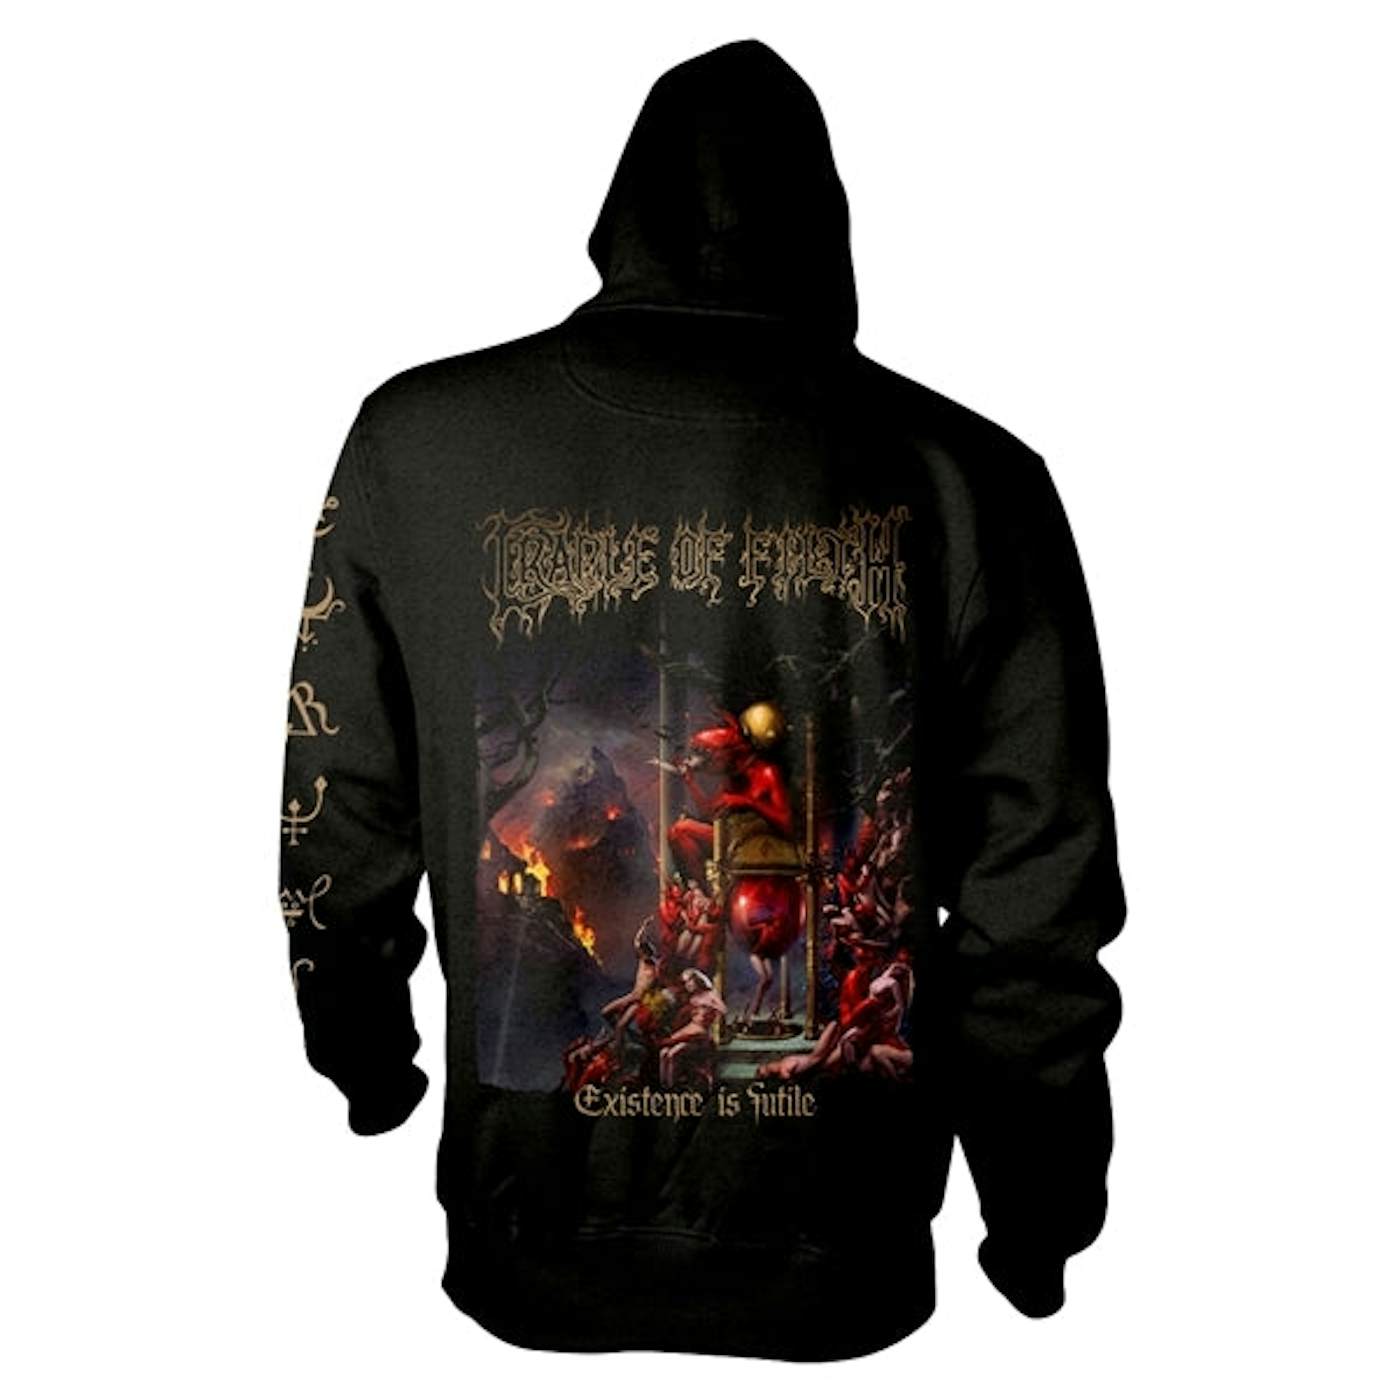 Cradle Of Filth Hoodie - Existence (All Existence)